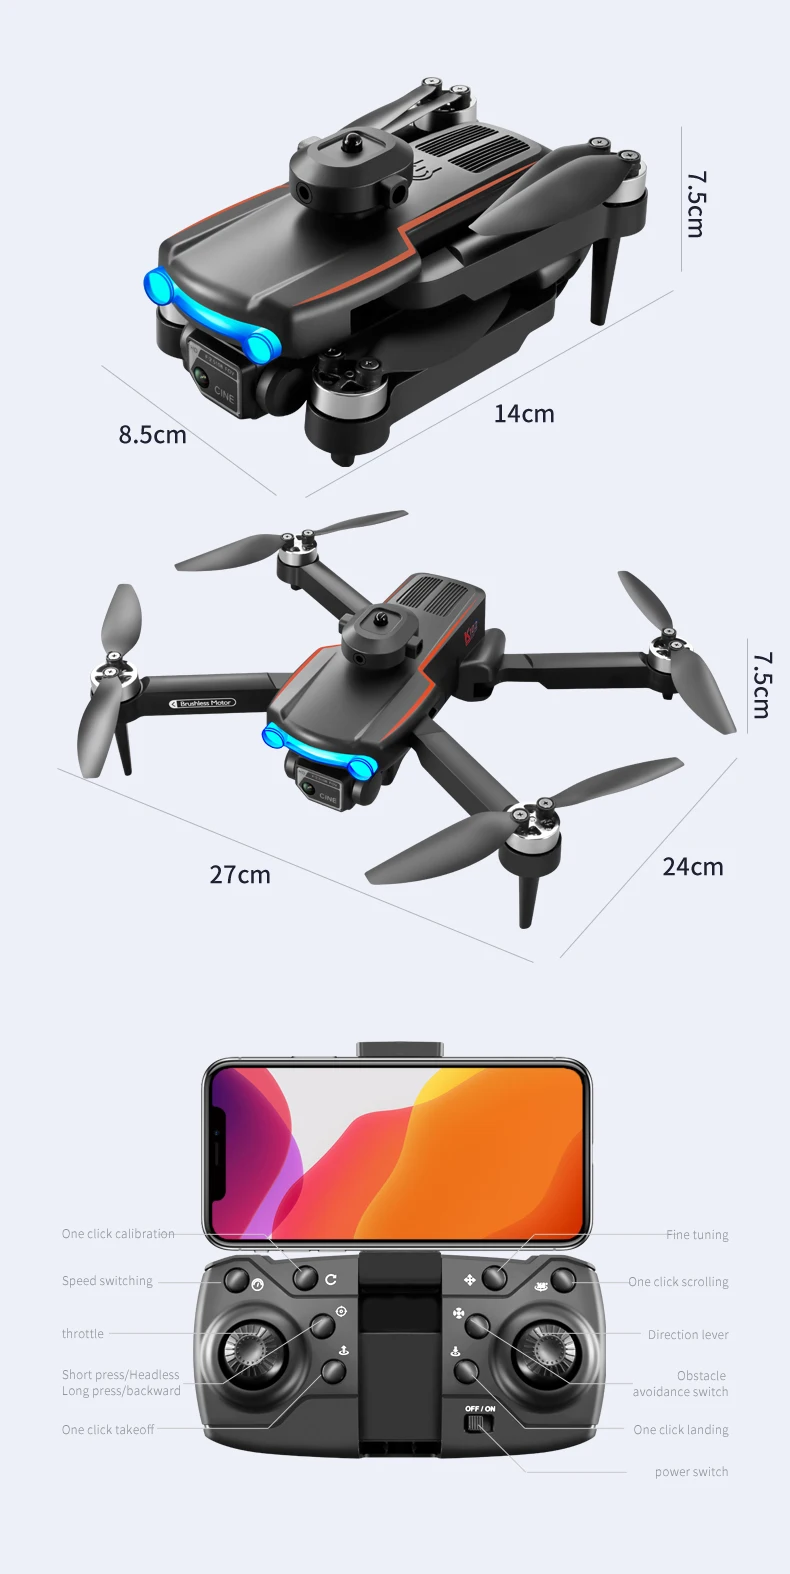 KBDFA K102 Pro Mini Drone 4K HD Camera Optical Flow Drones Aerial Photography Quadcopter Obstacle Avoidance WIFI FPV Dron RC Toy